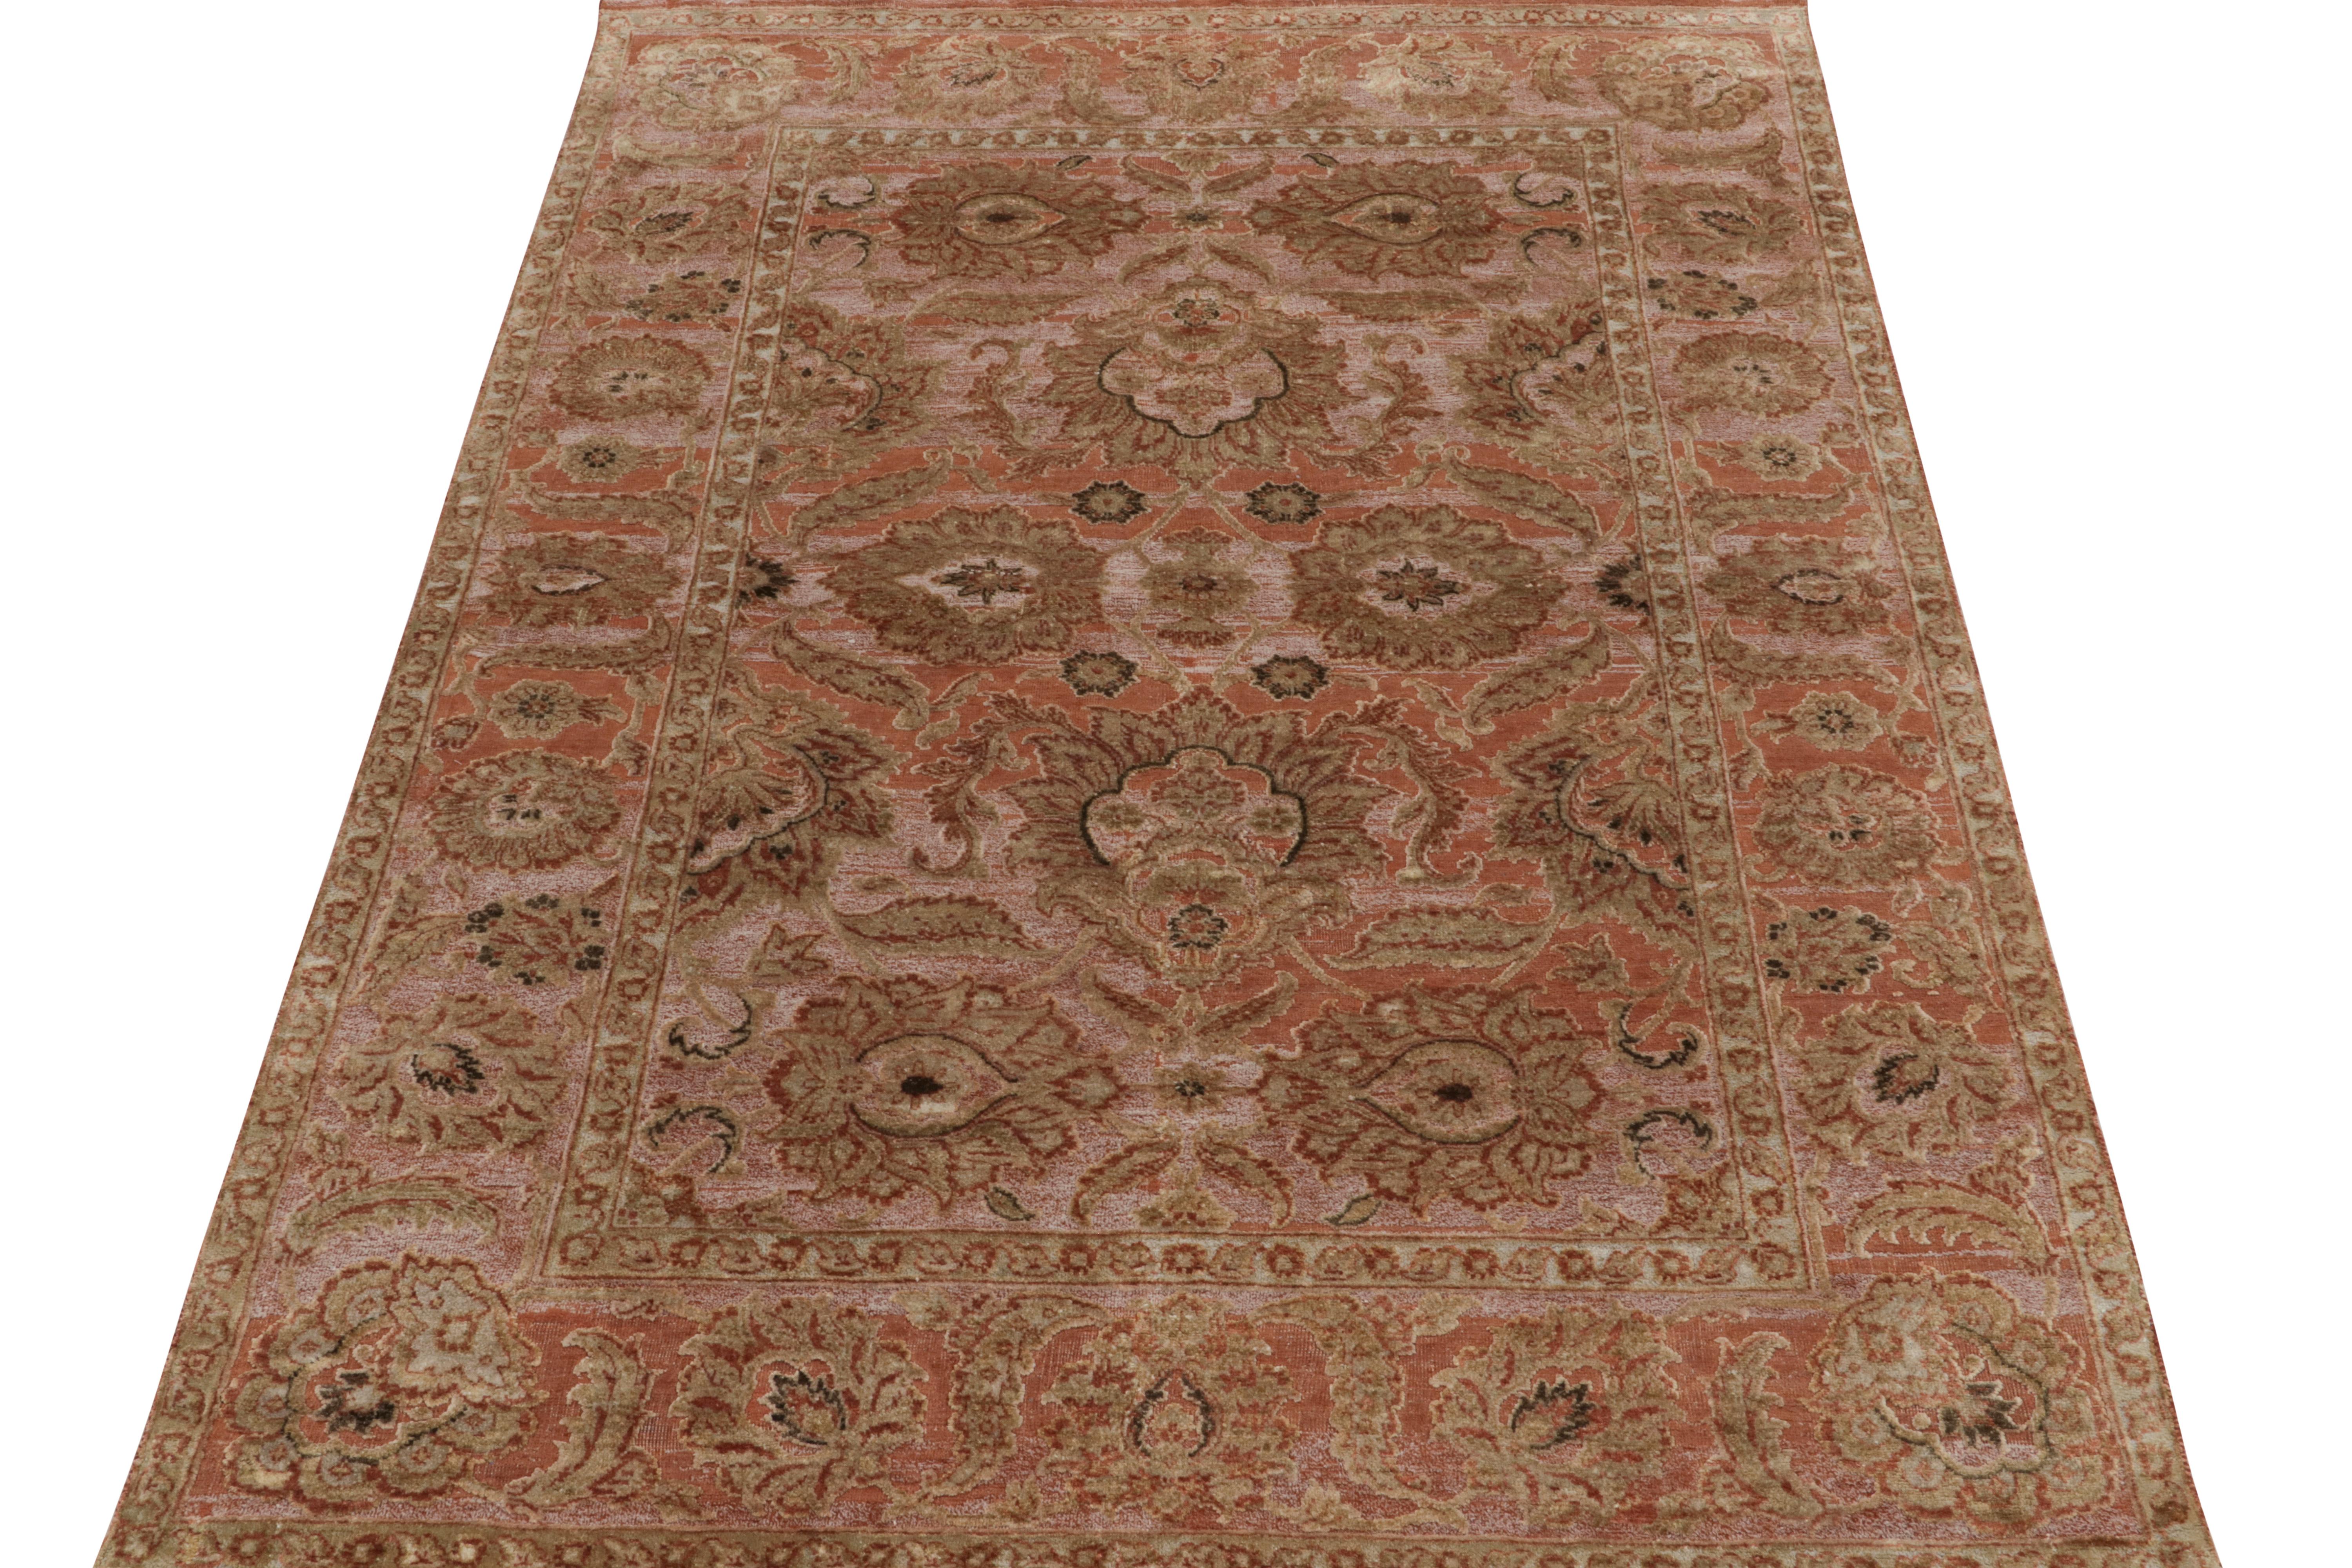 Indian Rug & Kilim’s Tabriz Style Rug in Rust Red, Pink and Beige-Brown Floral Patterns For Sale